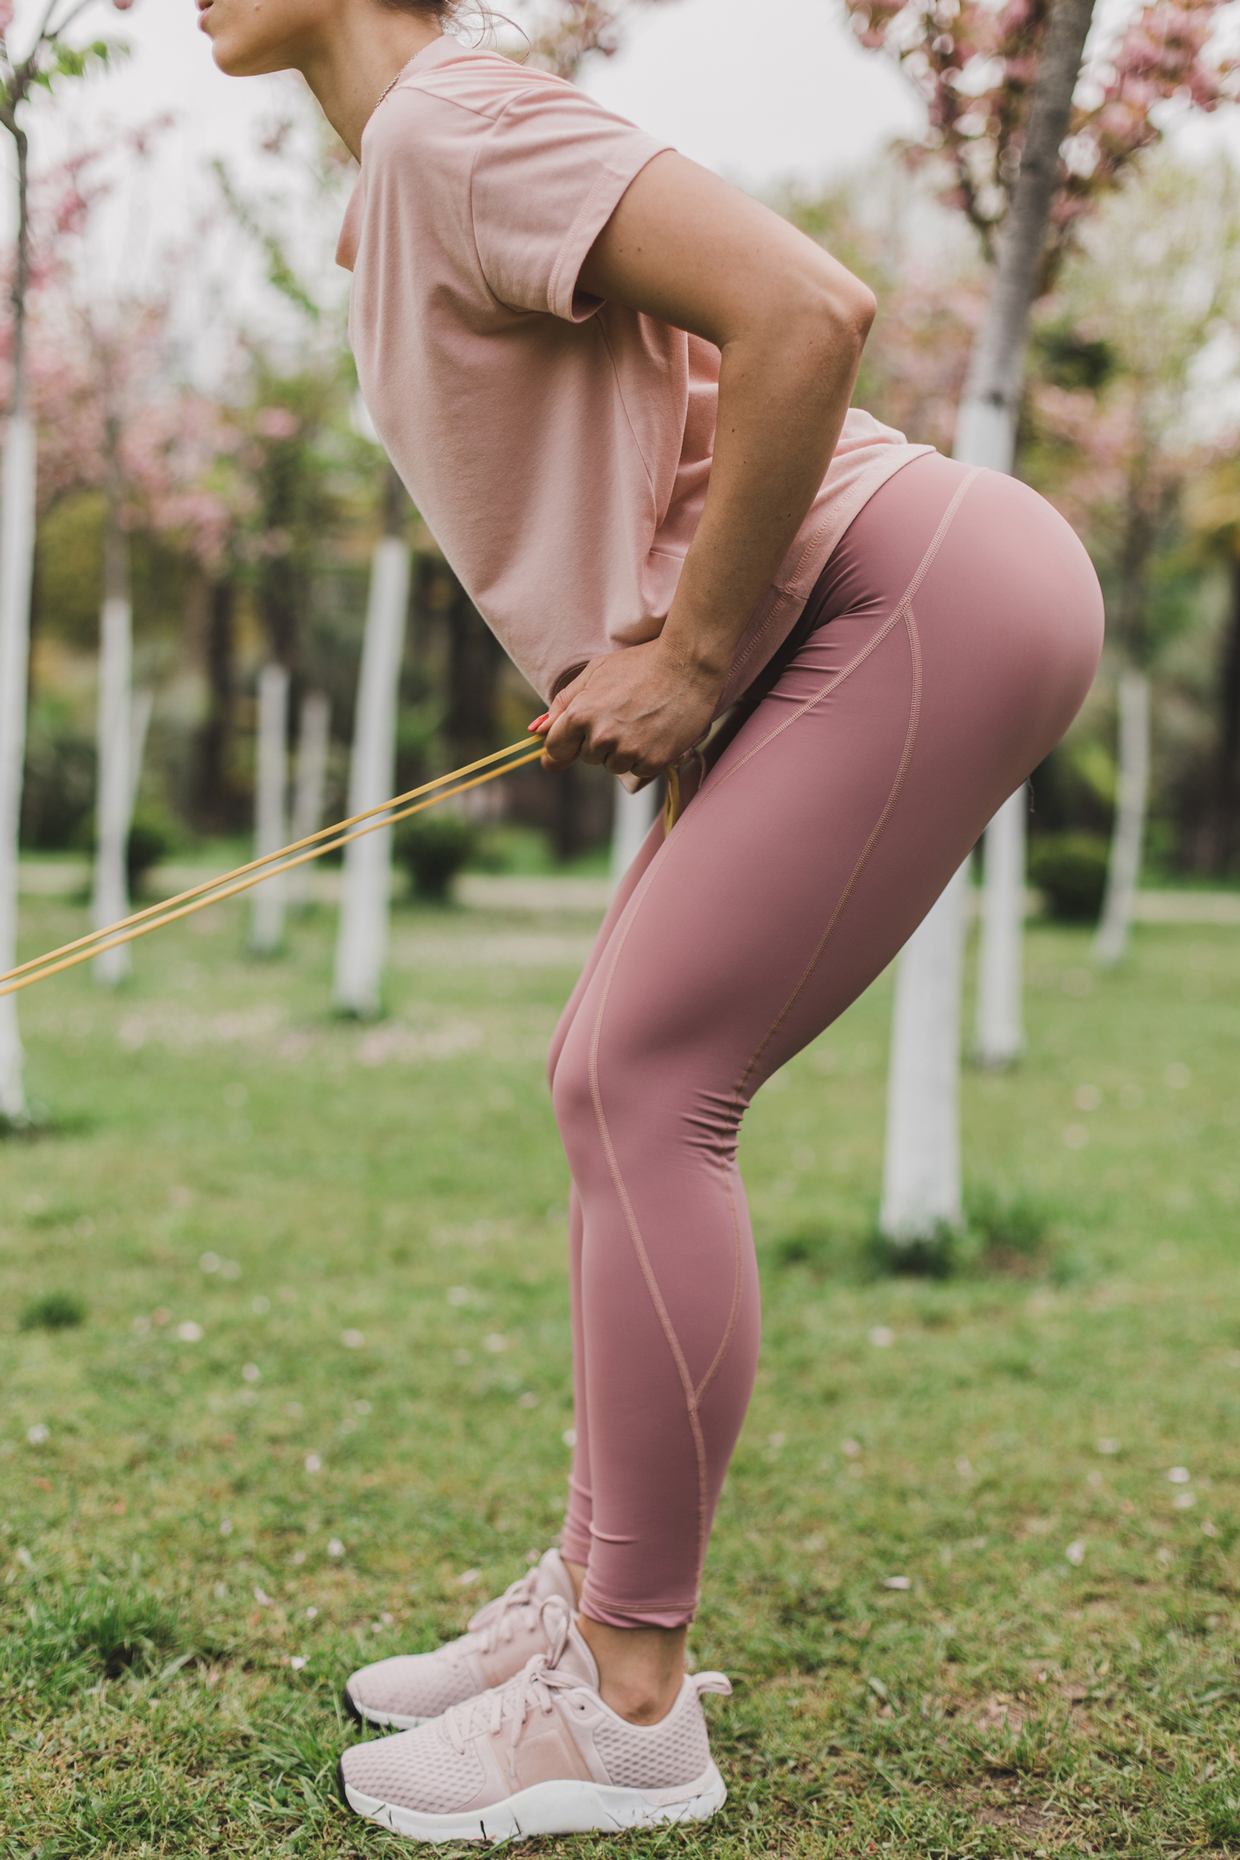 woman pink leggings and a T-shirt is engaged in outdoor sports among flowering trees